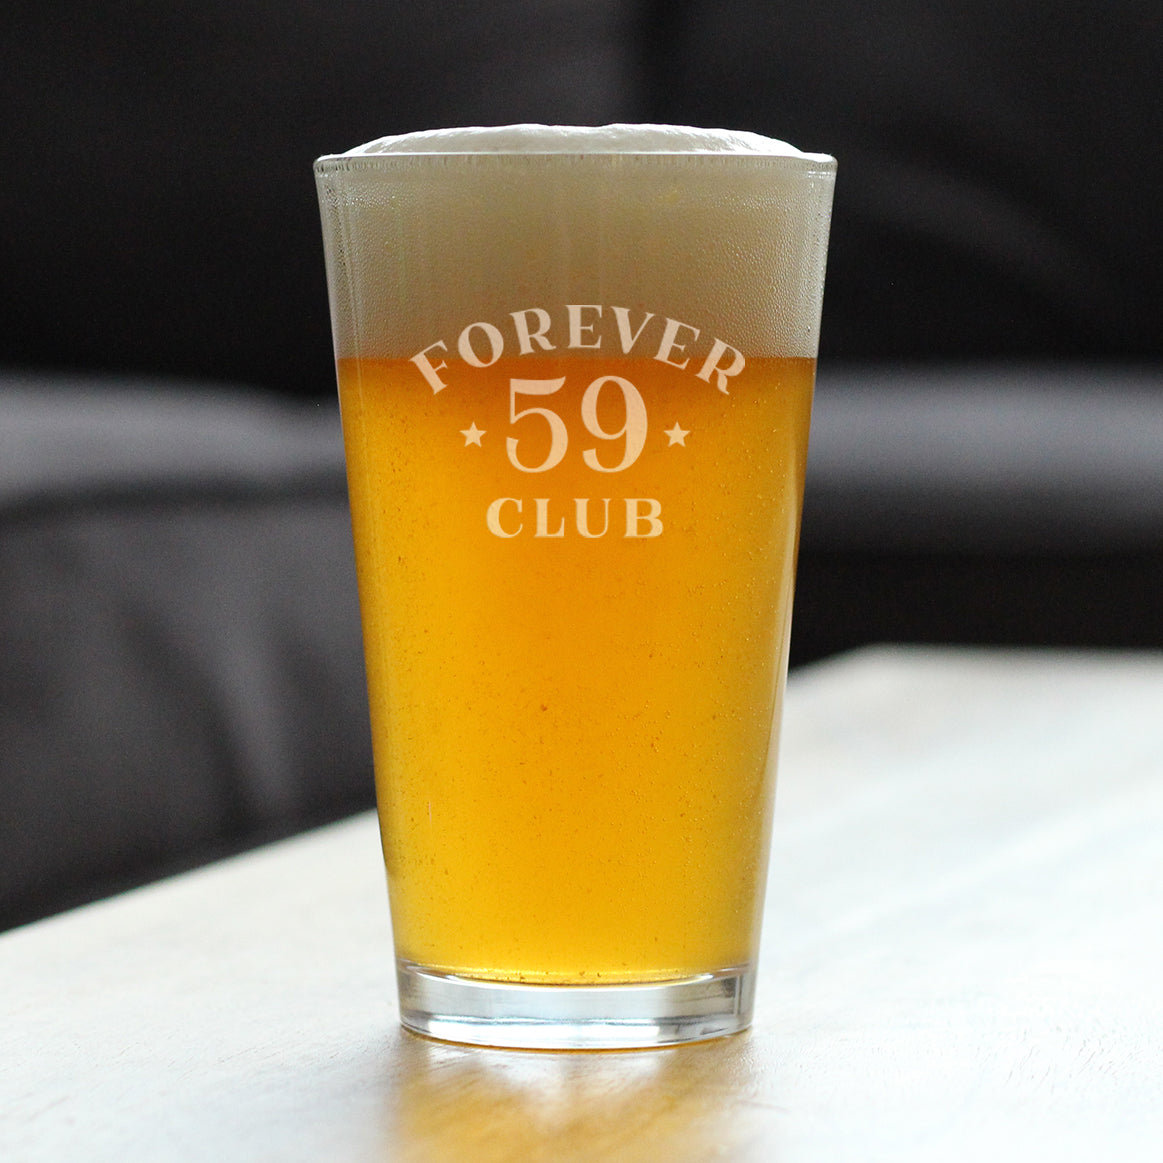 Forever 59 Club - Pint Glass for Beer 60th Birthday Gifts for Women &amp; Men Turning 60 - Fun Bday Party Decor - 16 Oz